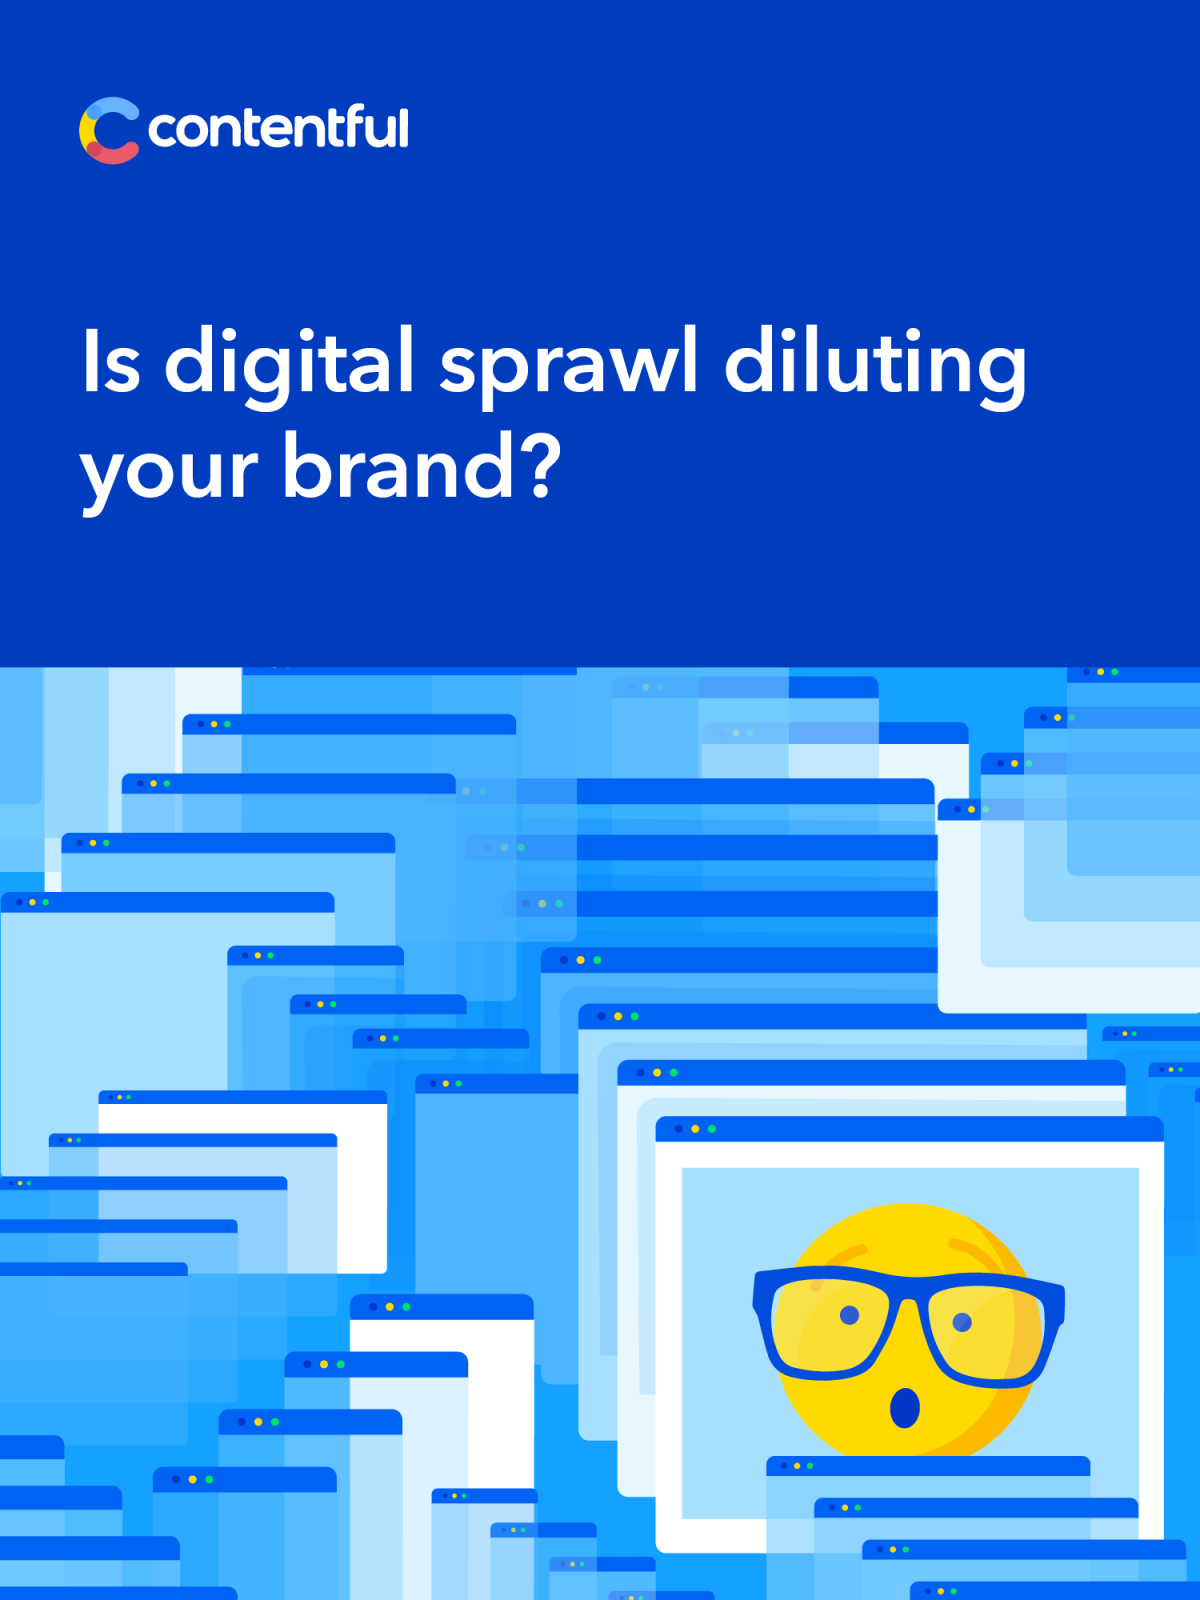 Whitepaper - Is digital sprawl diluting your brand?